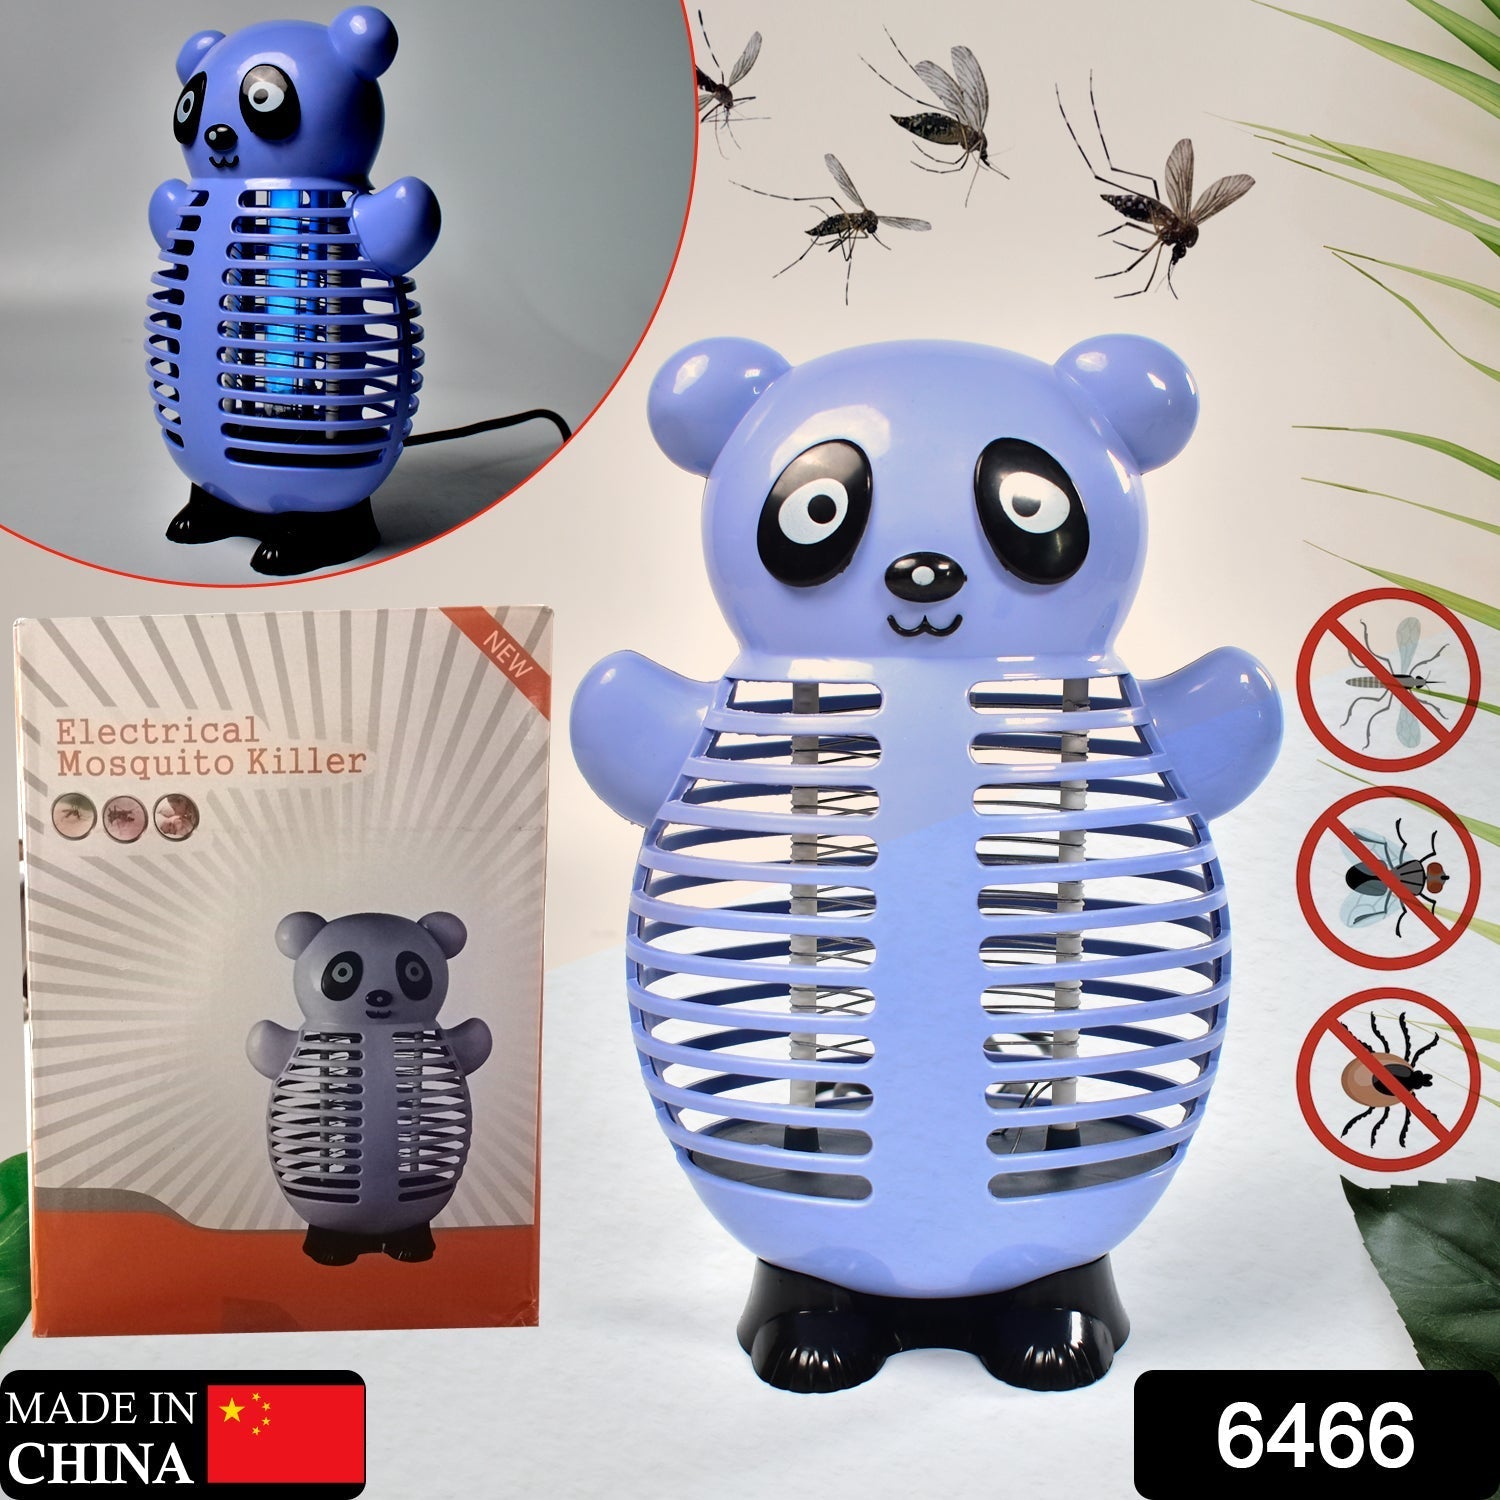 6466 Electronic Cartoon Led Mosquito Killer | Lamps Super Trap Machine For Home Insect Killer | Bug Zapper | USB Powered Machine Eco-Friendly Baby Mosquito Repellent Lamp |Jali Mosquito. 